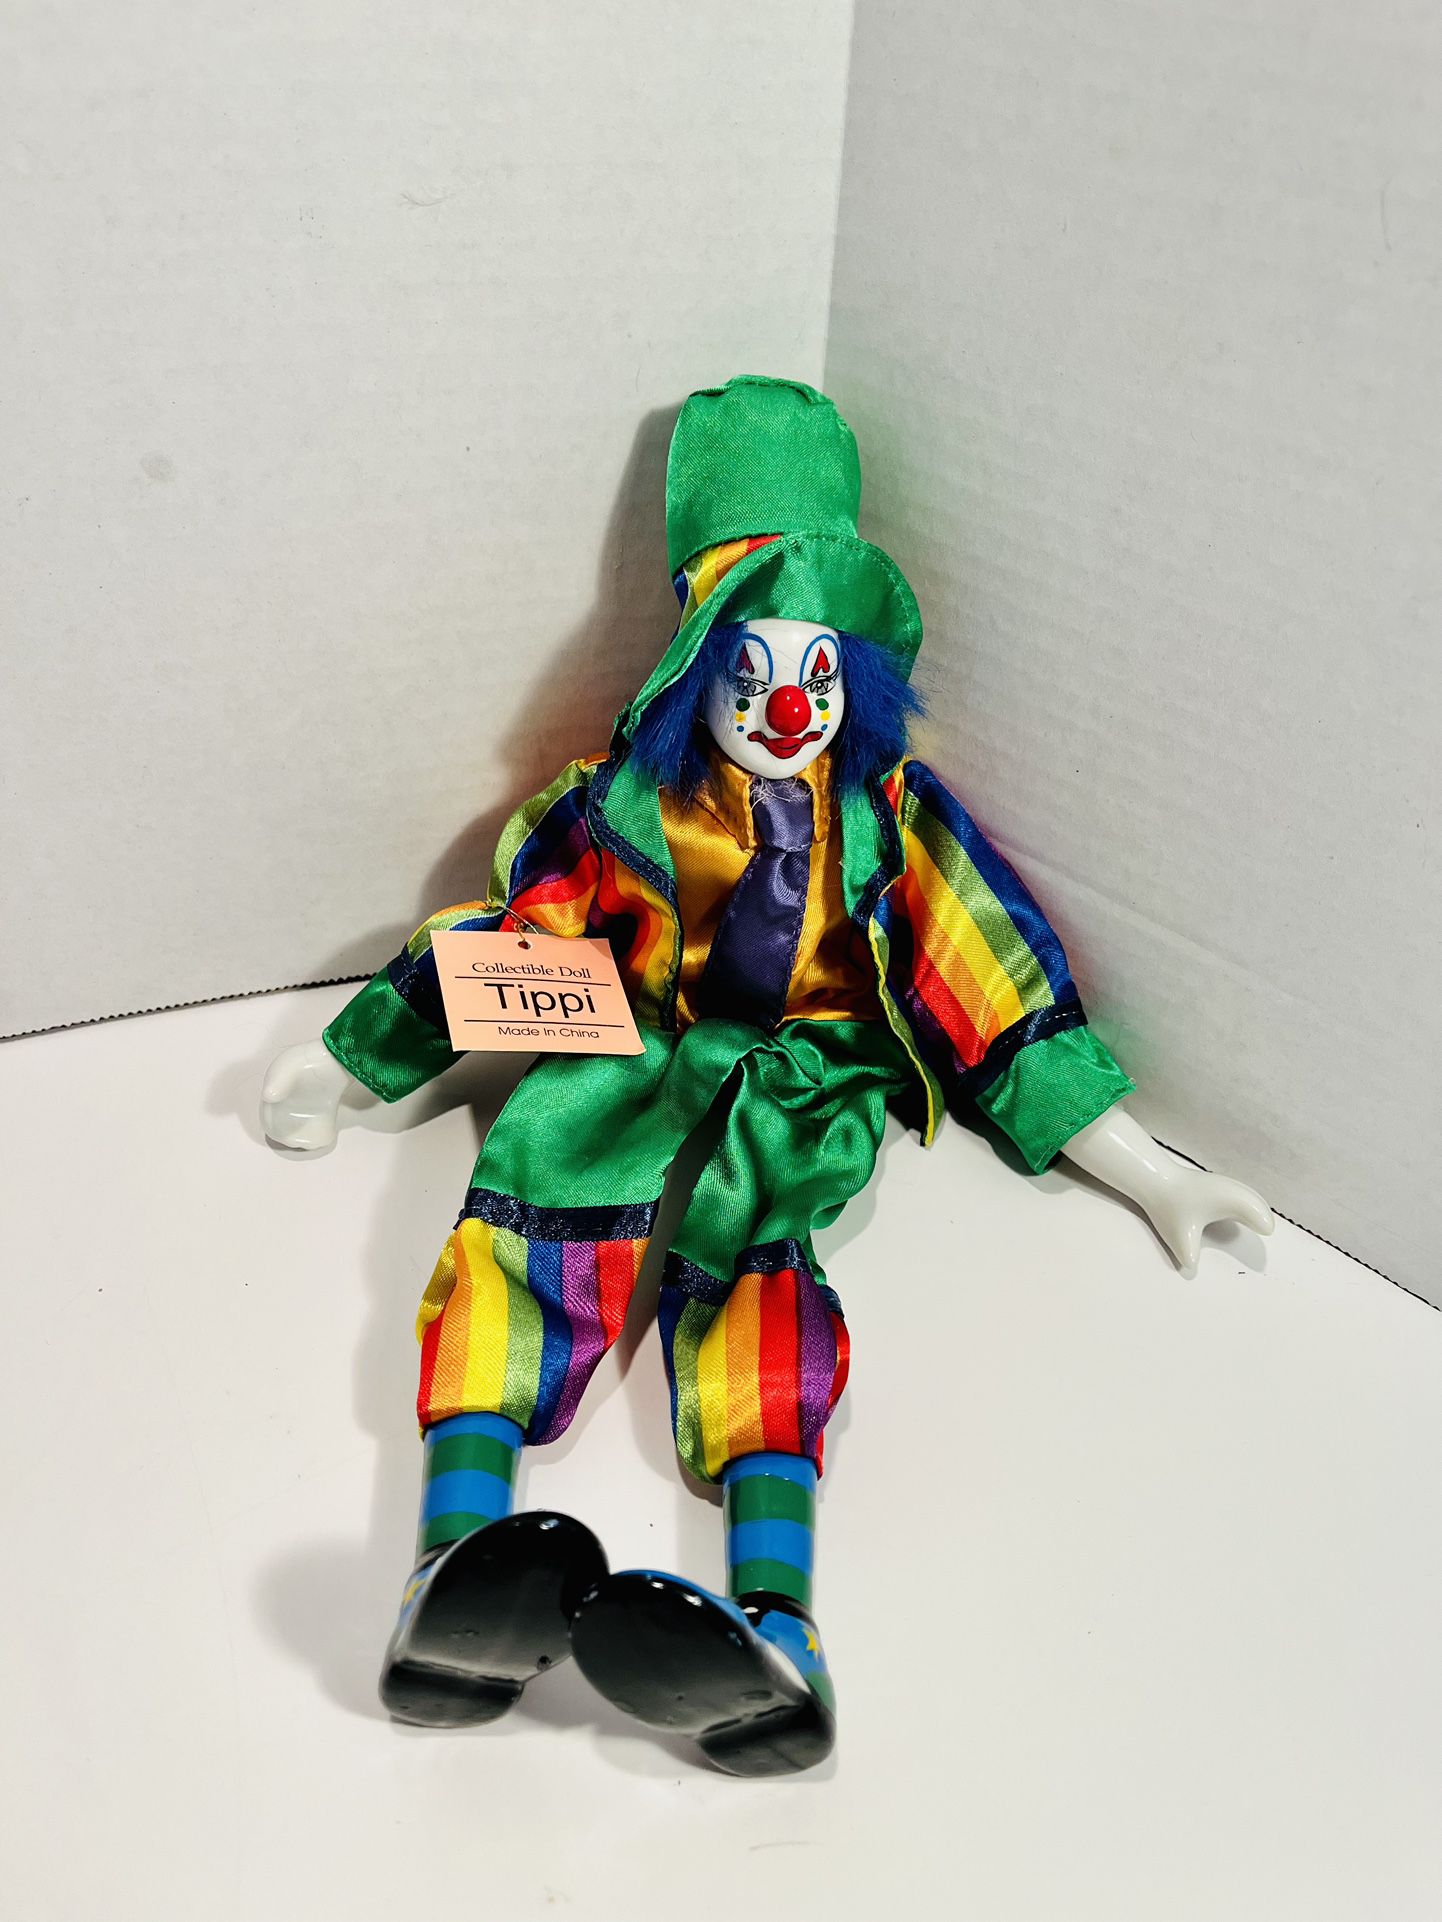 Vintage Show Stoppers Collectible PORCELAIN Tippi CLOWN 13" DOLL Hand Painted